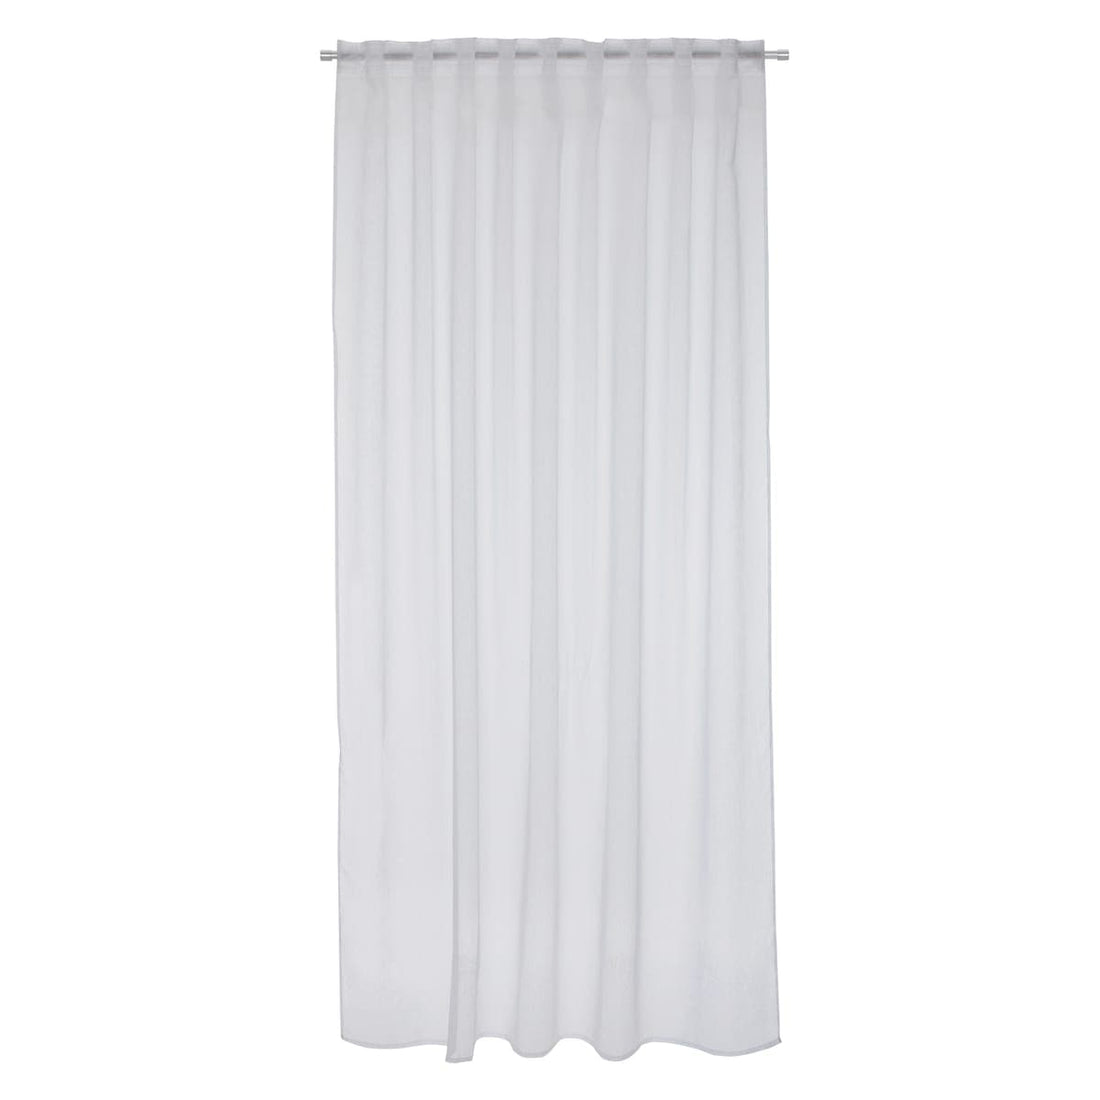 SOFTY WHITE FILTER CURTAIN 200X280 CM WITH CONCEALED LOOP AND WEBBING - best price from Maltashopper.com BR480009475